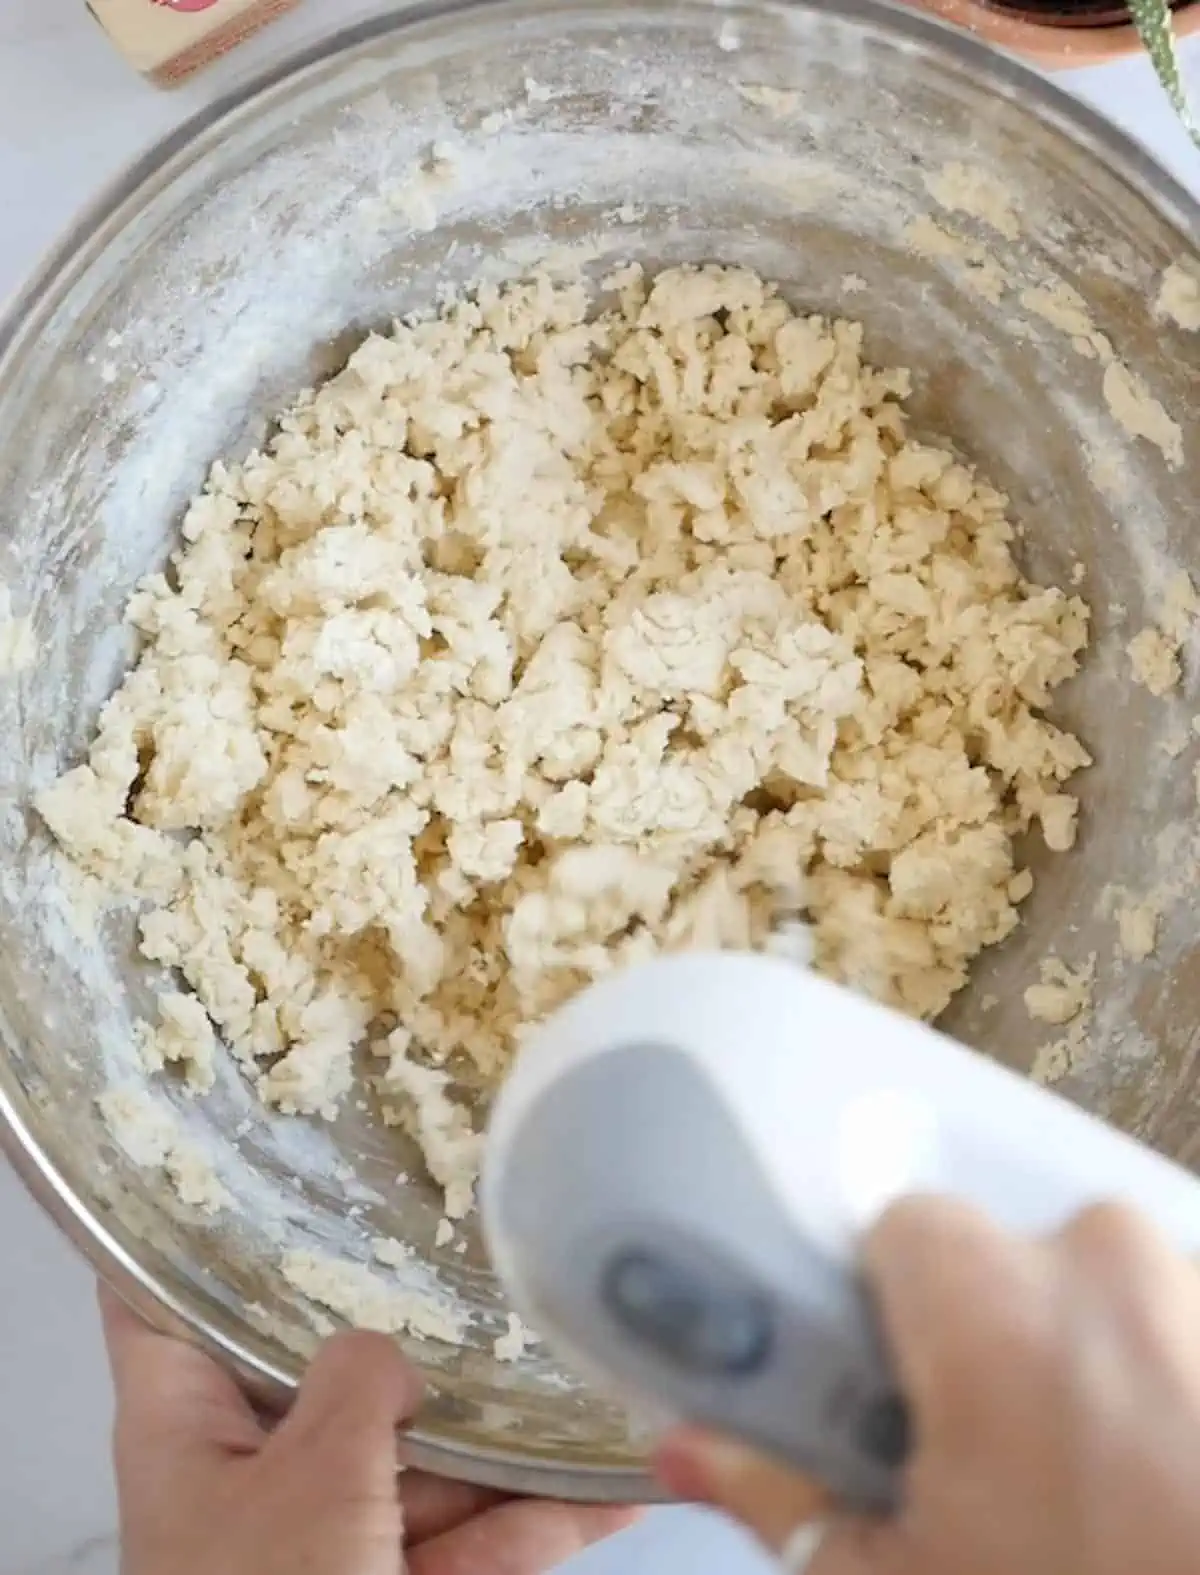 Crumbly vegan thumbprint cookie batter that is being mixed with an electric hand mixer.